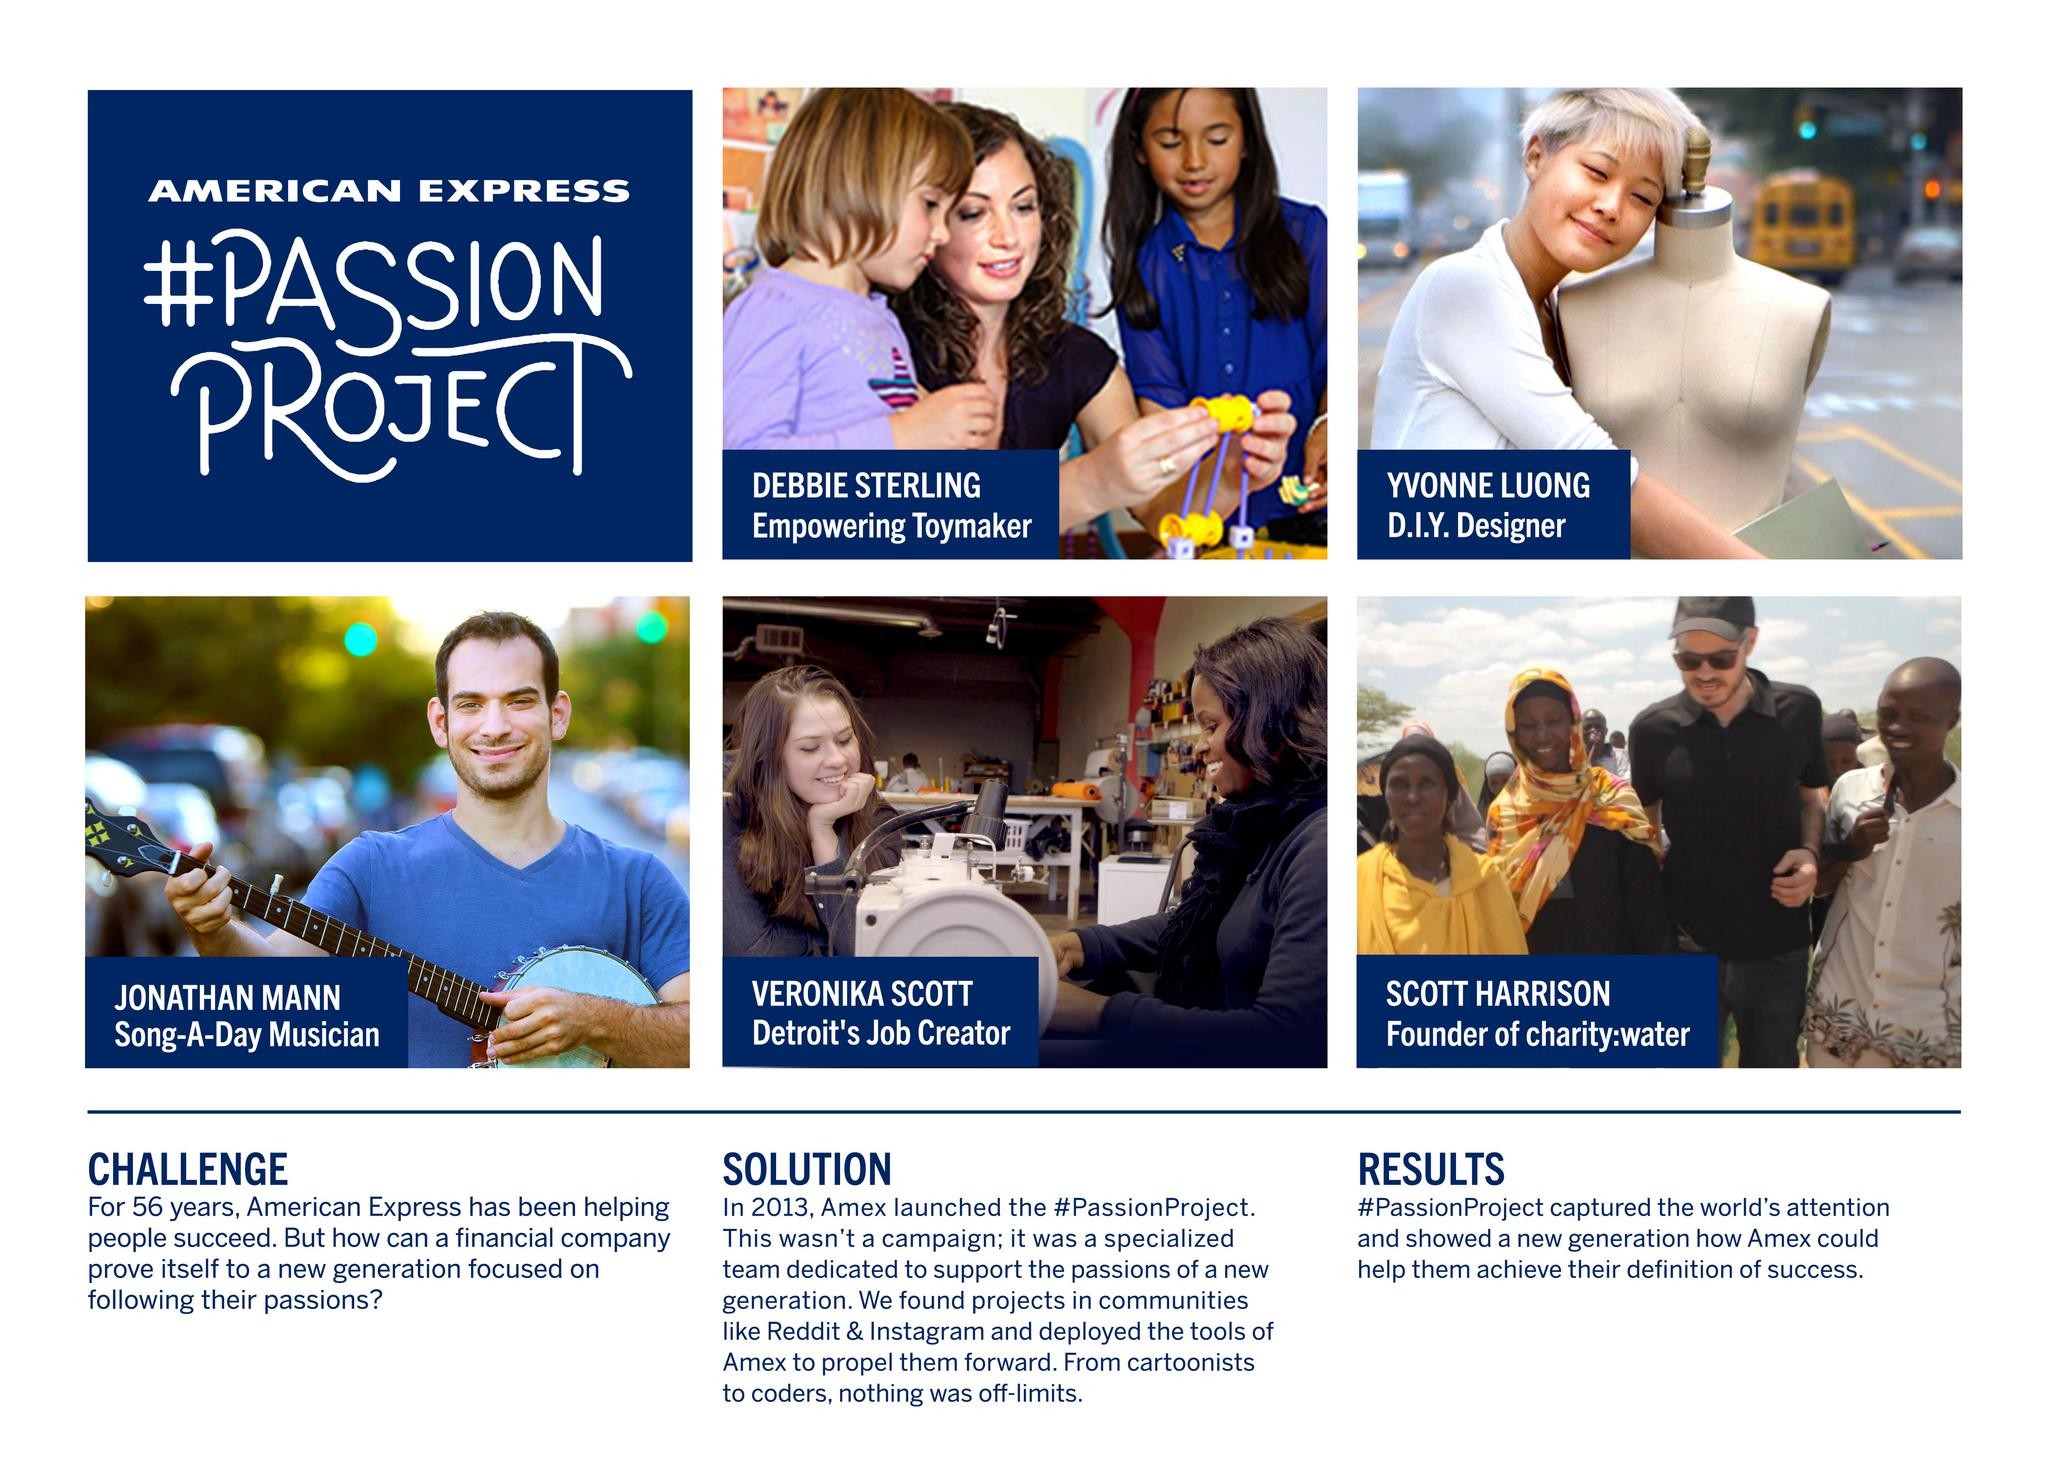 #PASSIONPROJECT